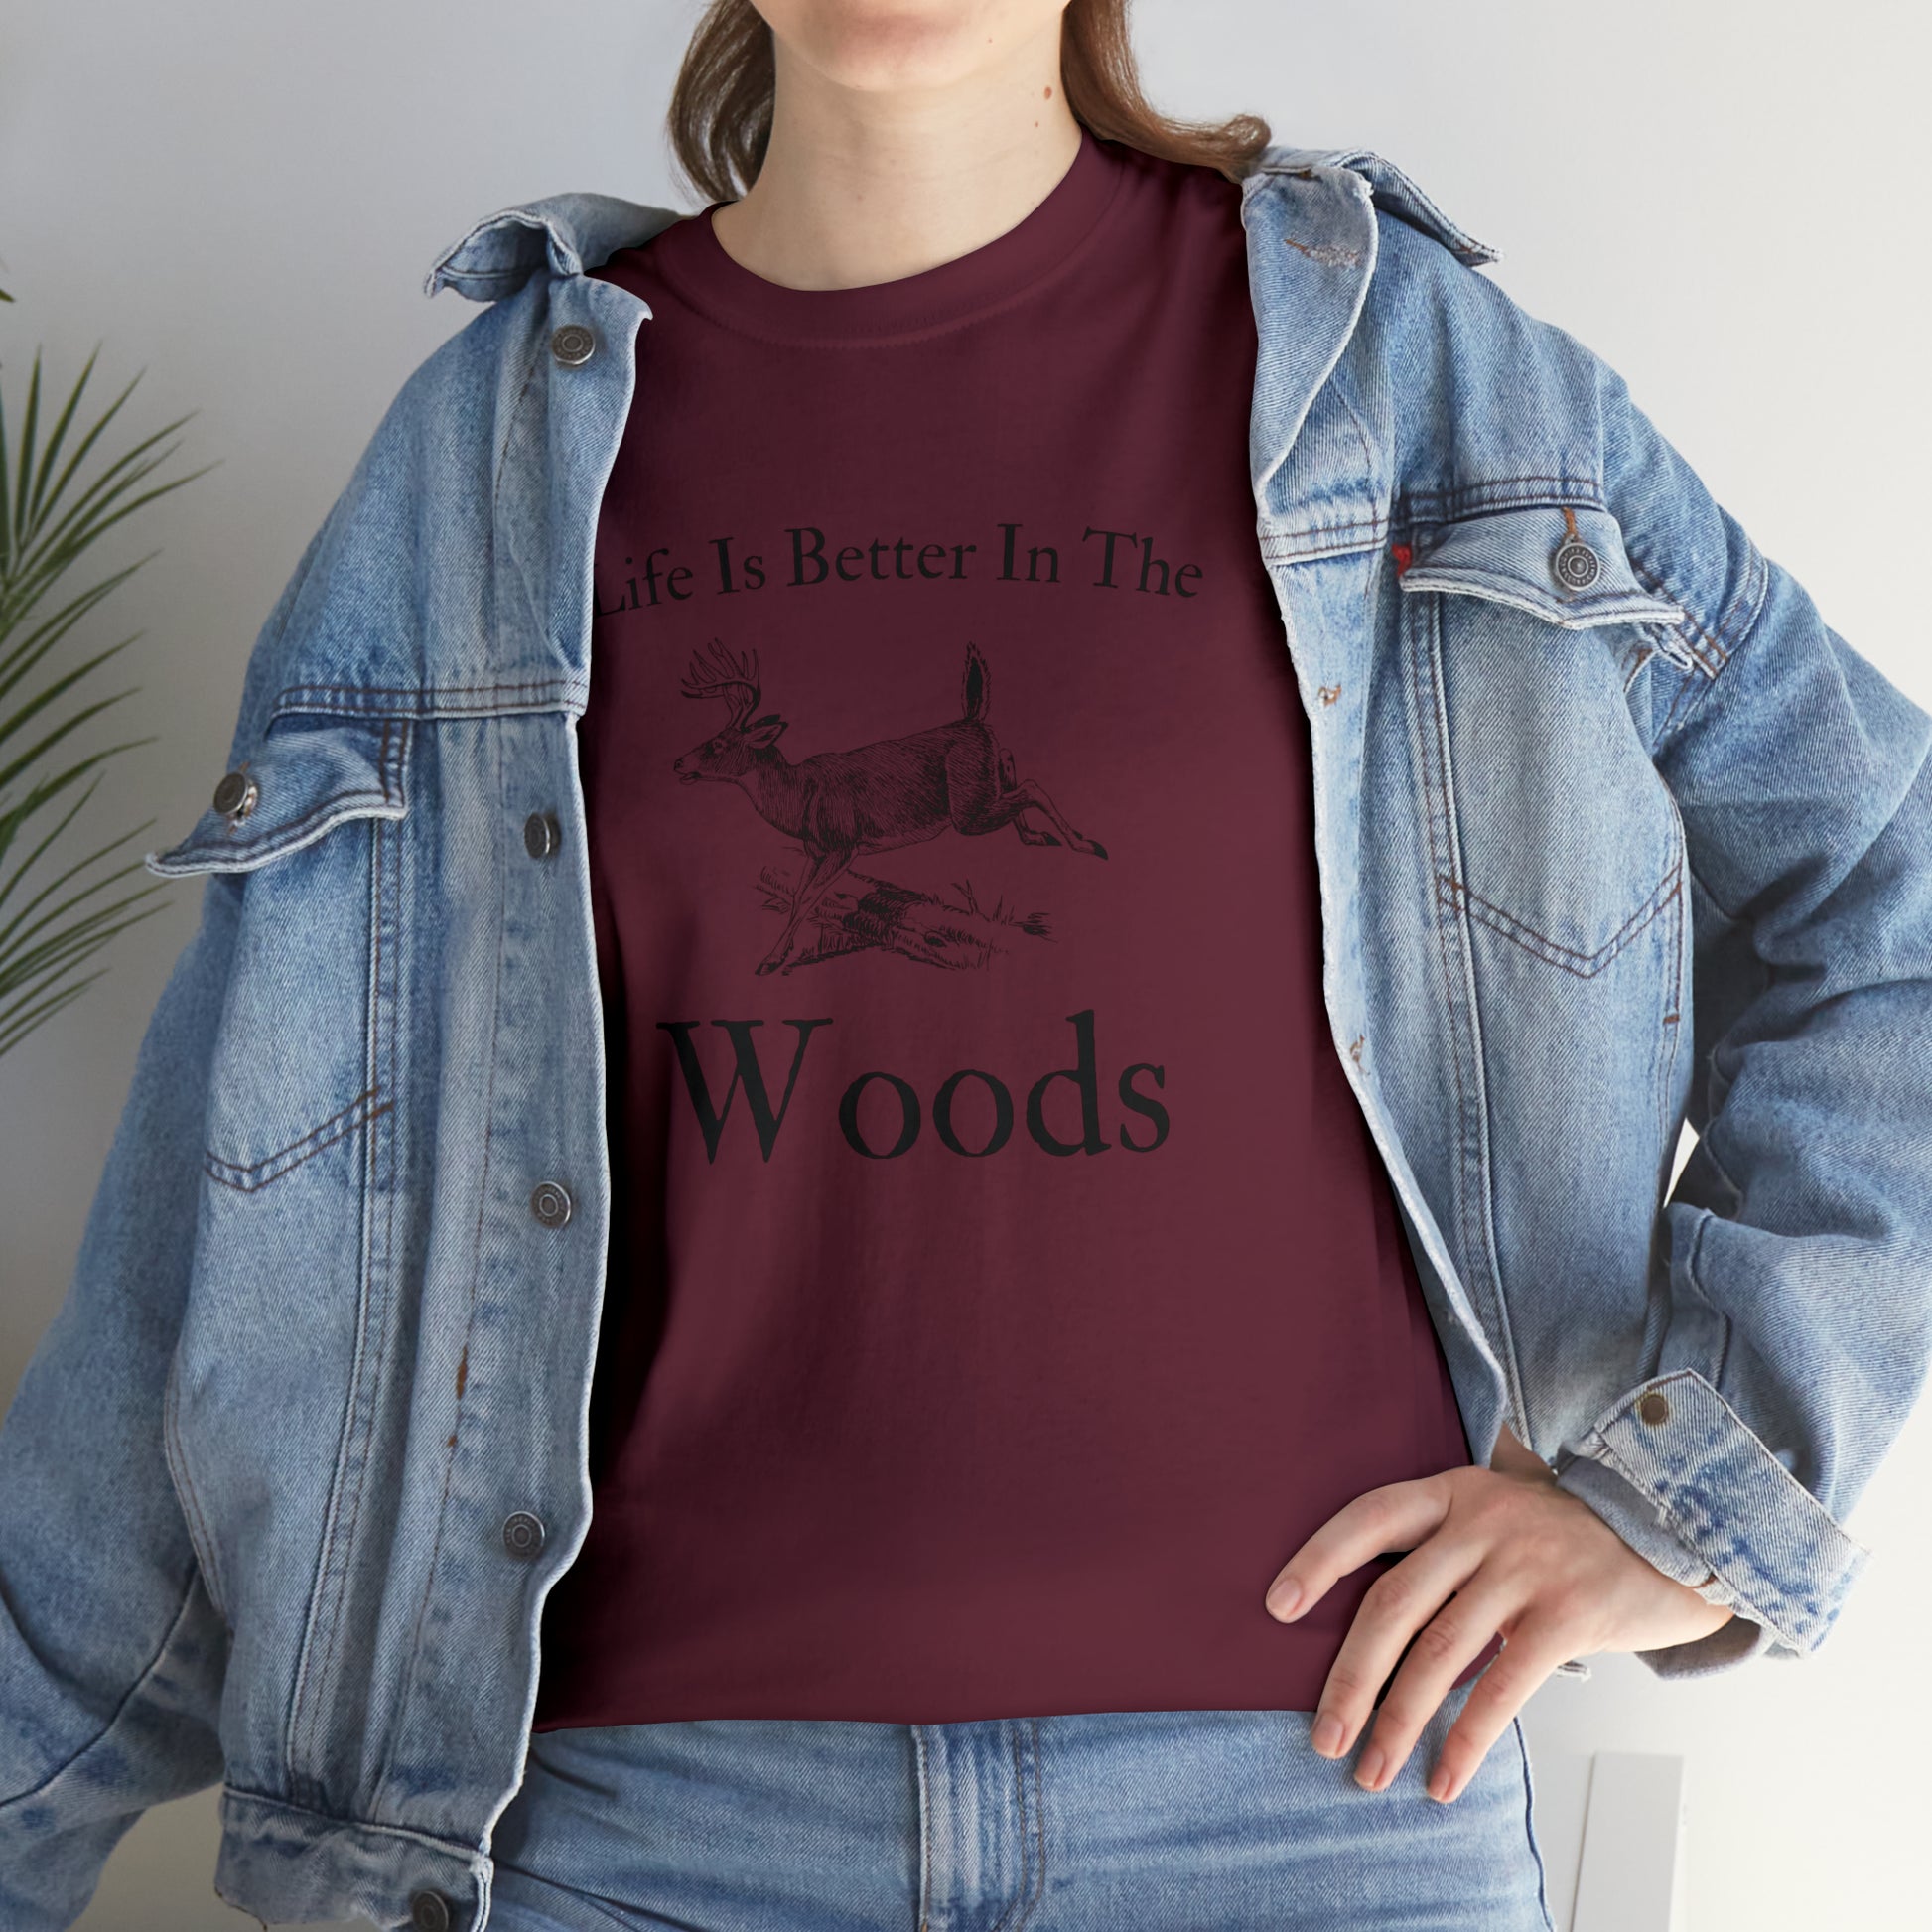 "Life Is Better In The Woods" T-Shirt - Weave Got Gifts - Unique Gifts You Won’t Find Anywhere Else!